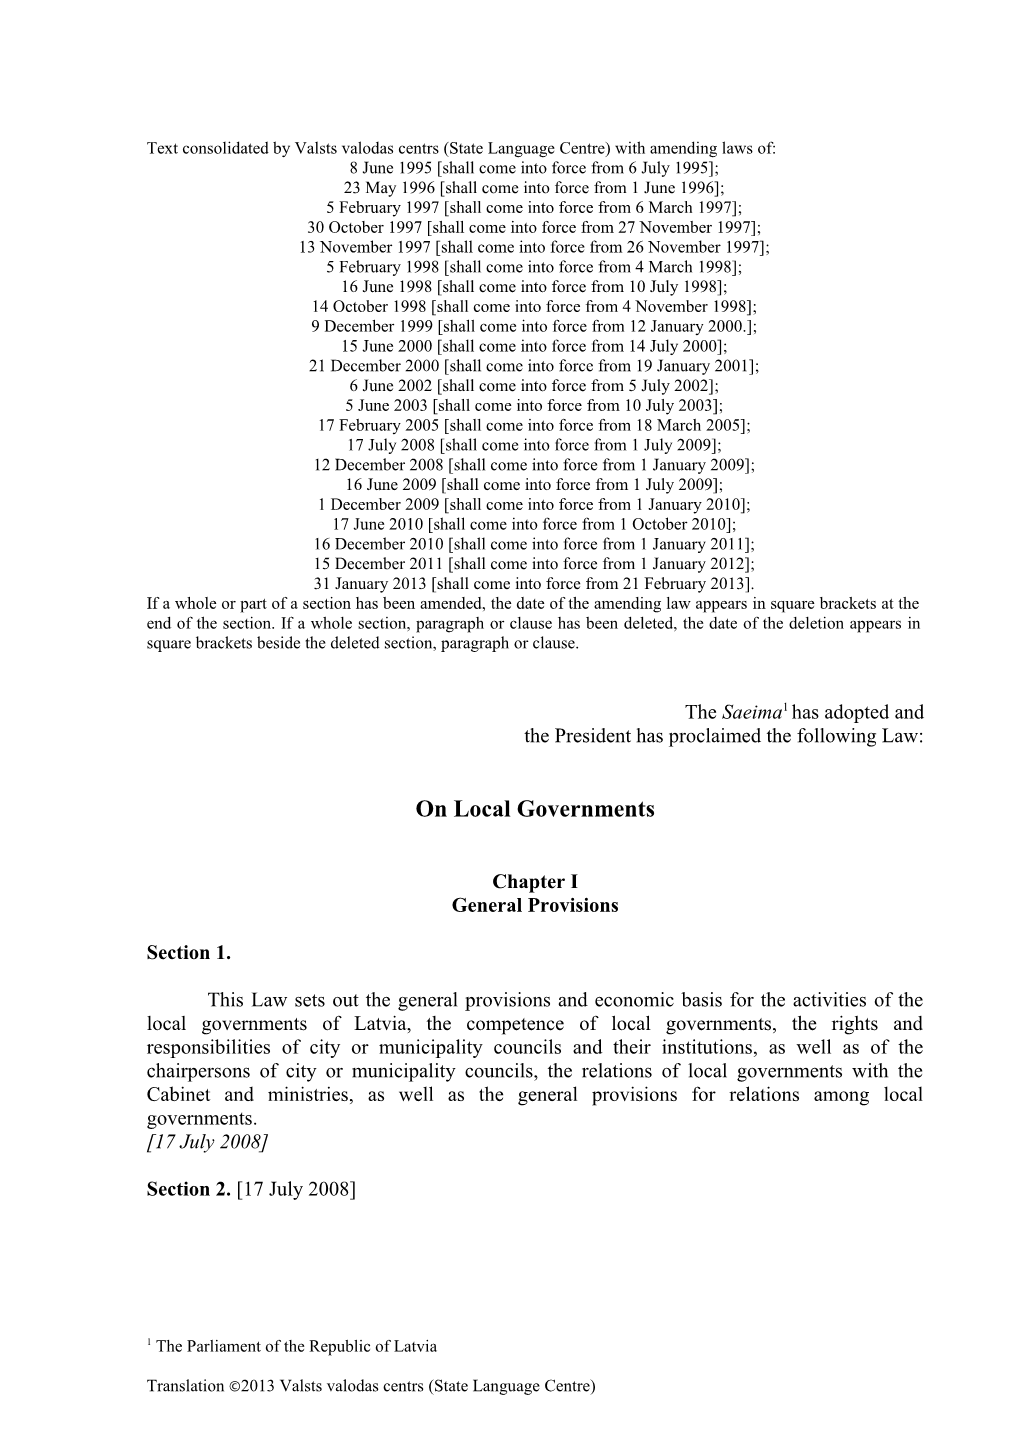 Text Consolidated by Valsts Valodas Centrs (State Language Centre) with Amending Laws Of s10